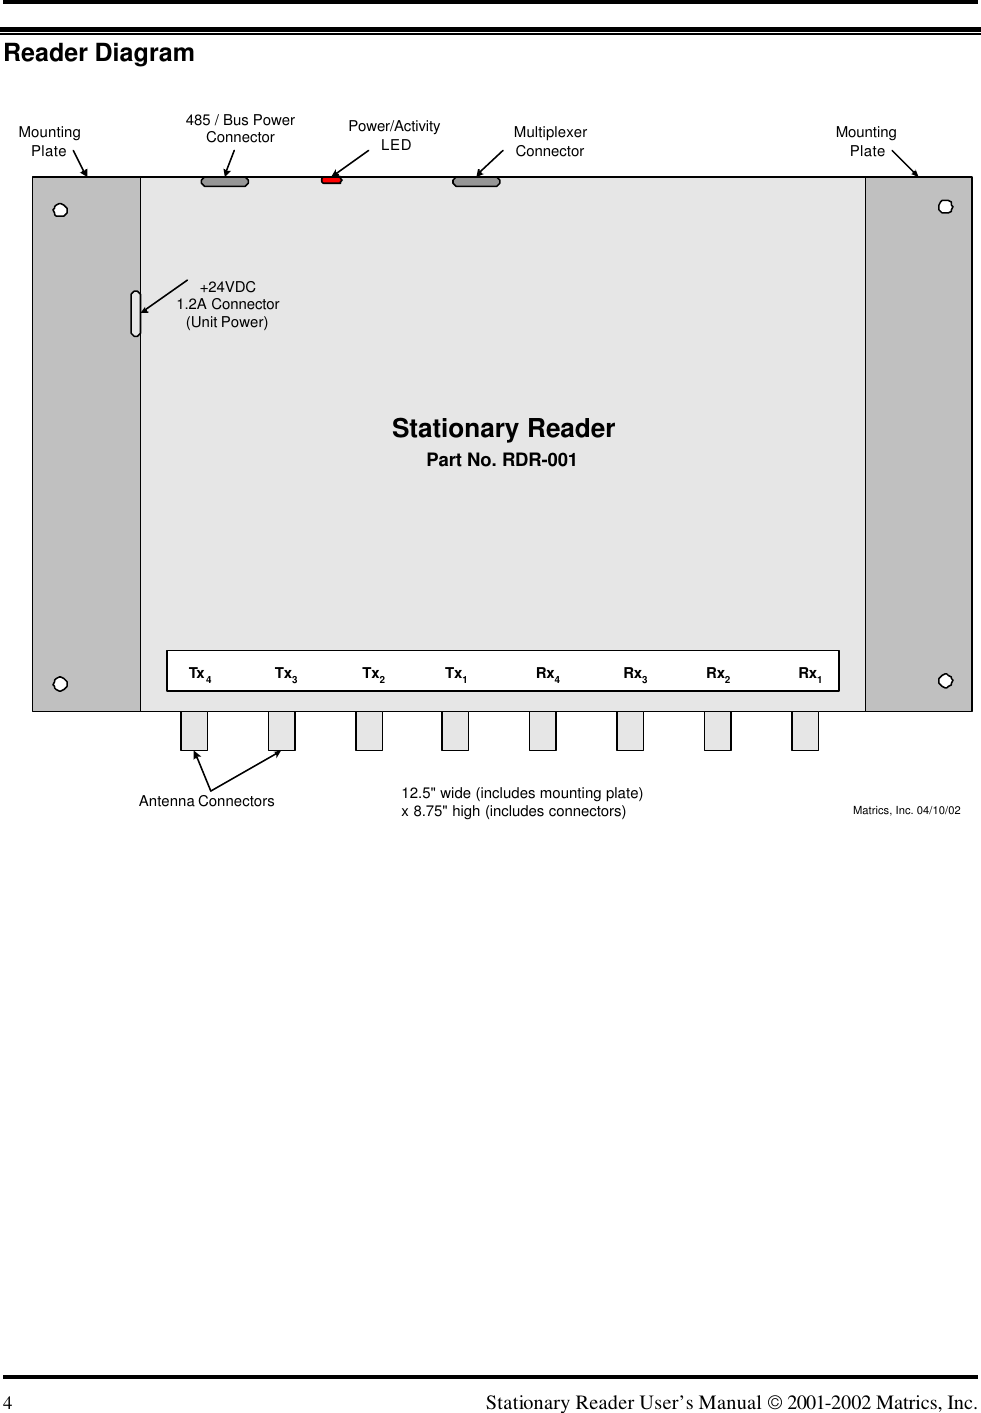  4 Stationary Reader User’s Manual  2001-2002 Matrics, Inc. Reader Diagram  Stationary ReaderPart No. RDR-001MultiplexerConnectorMatrics, Inc. 04/10/02Tx 4Tx3Tx2Tx1Rx4Rx3Rx2Rx1485 / Bus PowerConnector Power/ActivityLED+24VDC1.2A Connector(Unit Power)MountingPlateMountingPlate12.5&quot; wide (includes mounting plate)x 8.75&quot; high (includes connectors)Antenna Connectors 